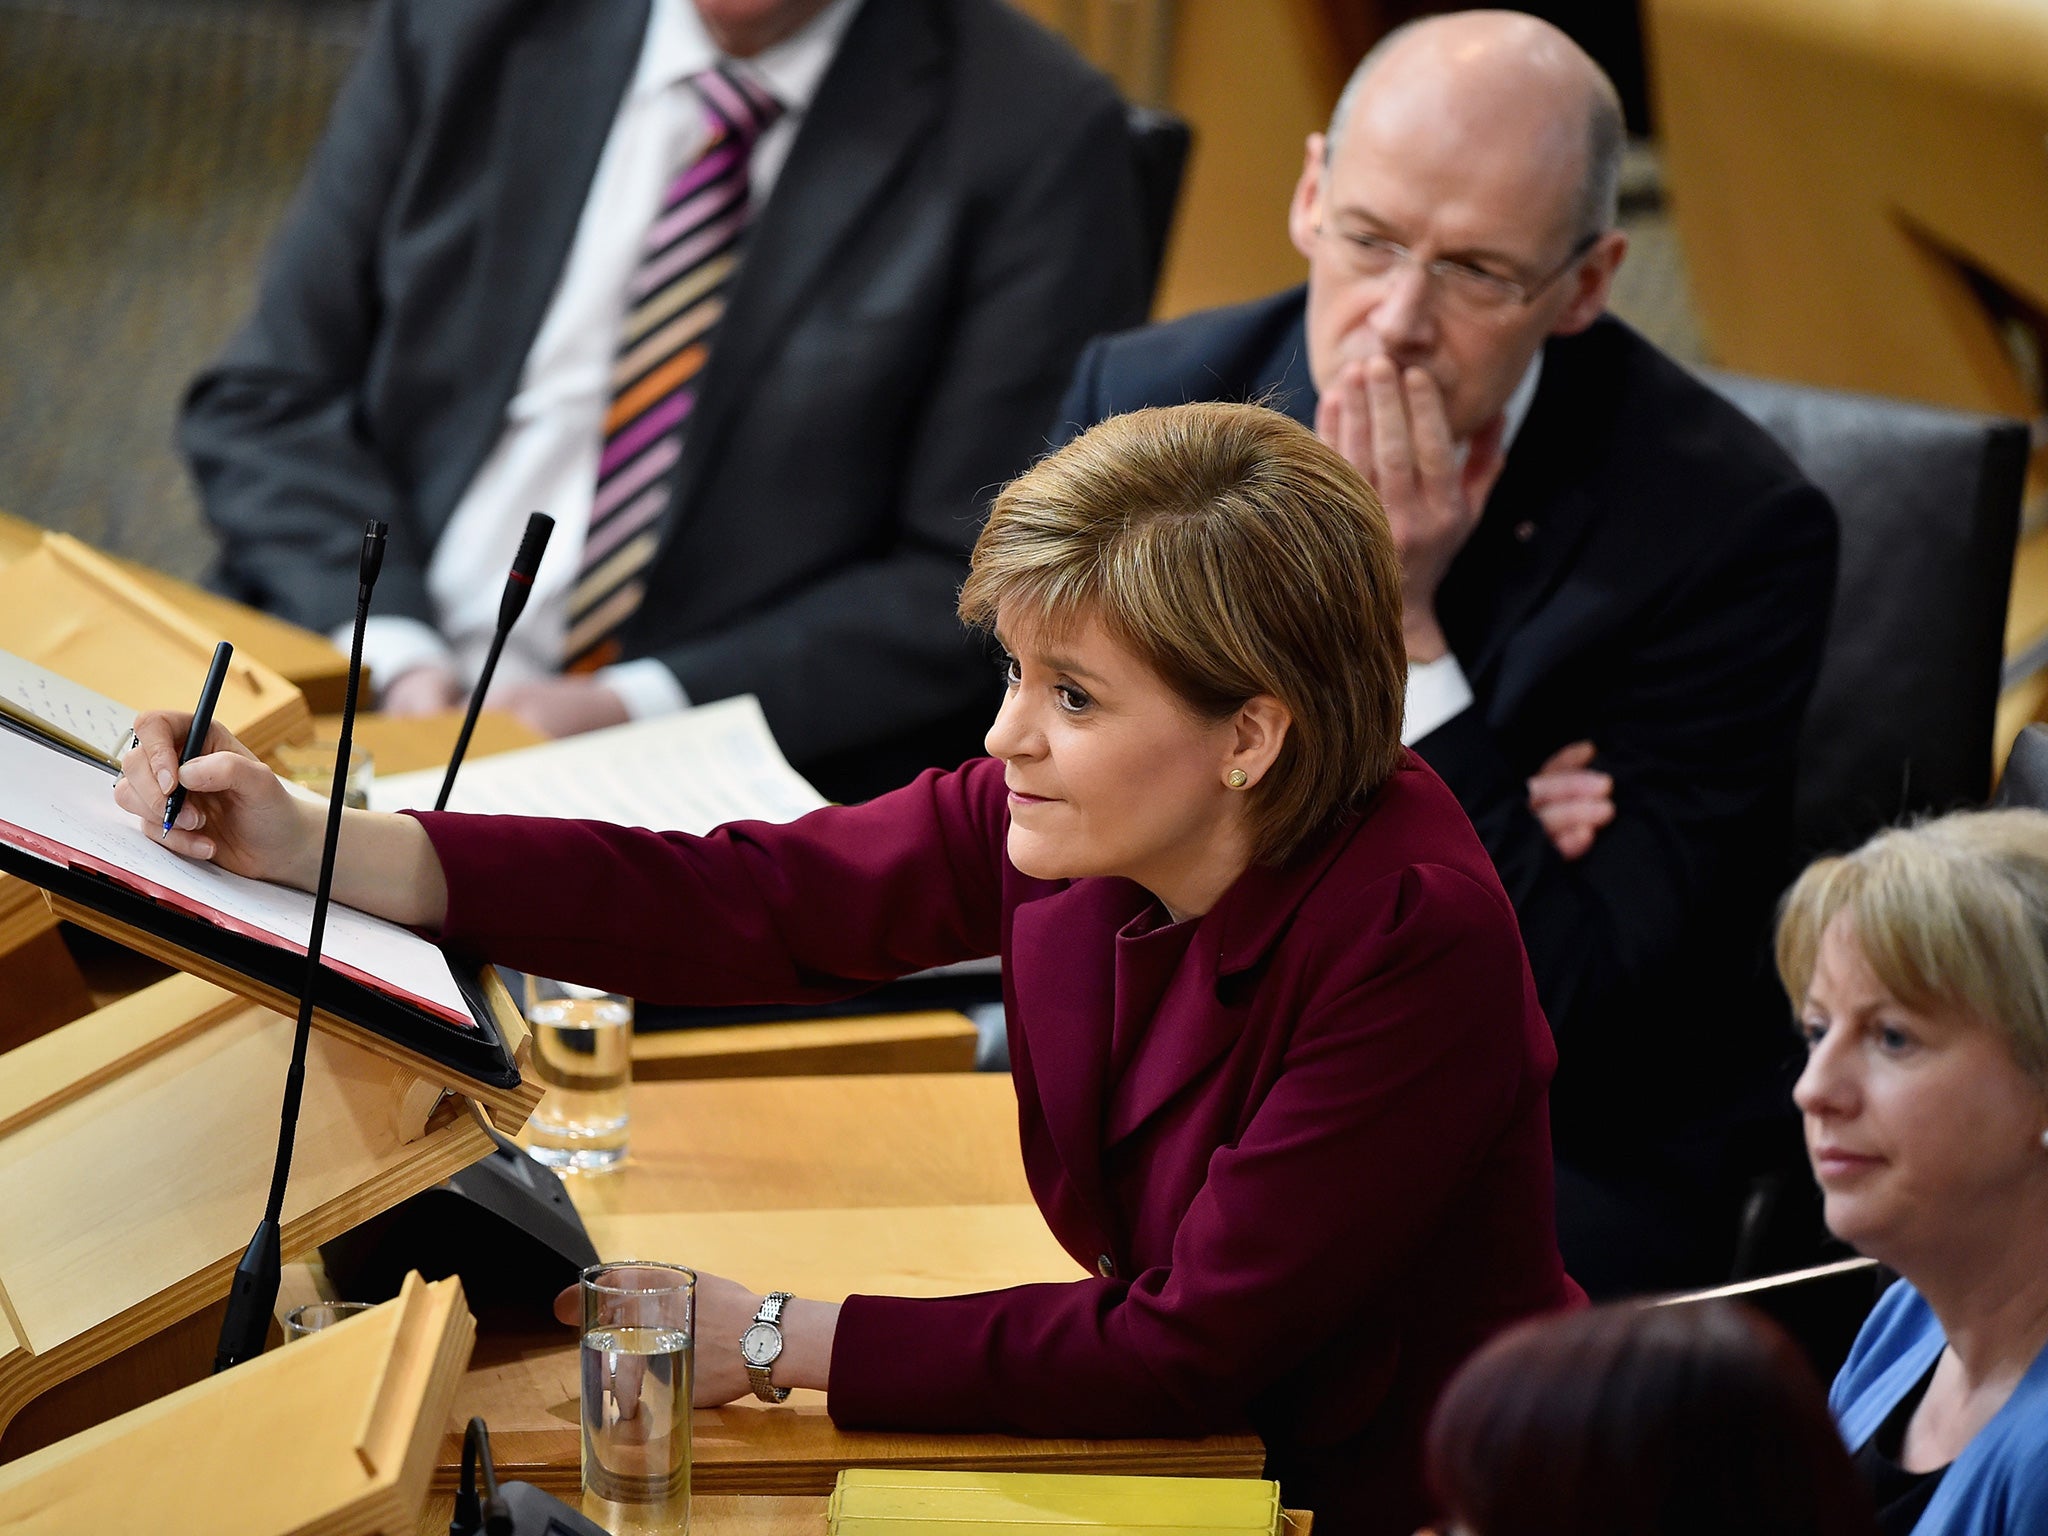 Nicola Sturgeon First Minister of Scotland and the leader of the Scottish National Party